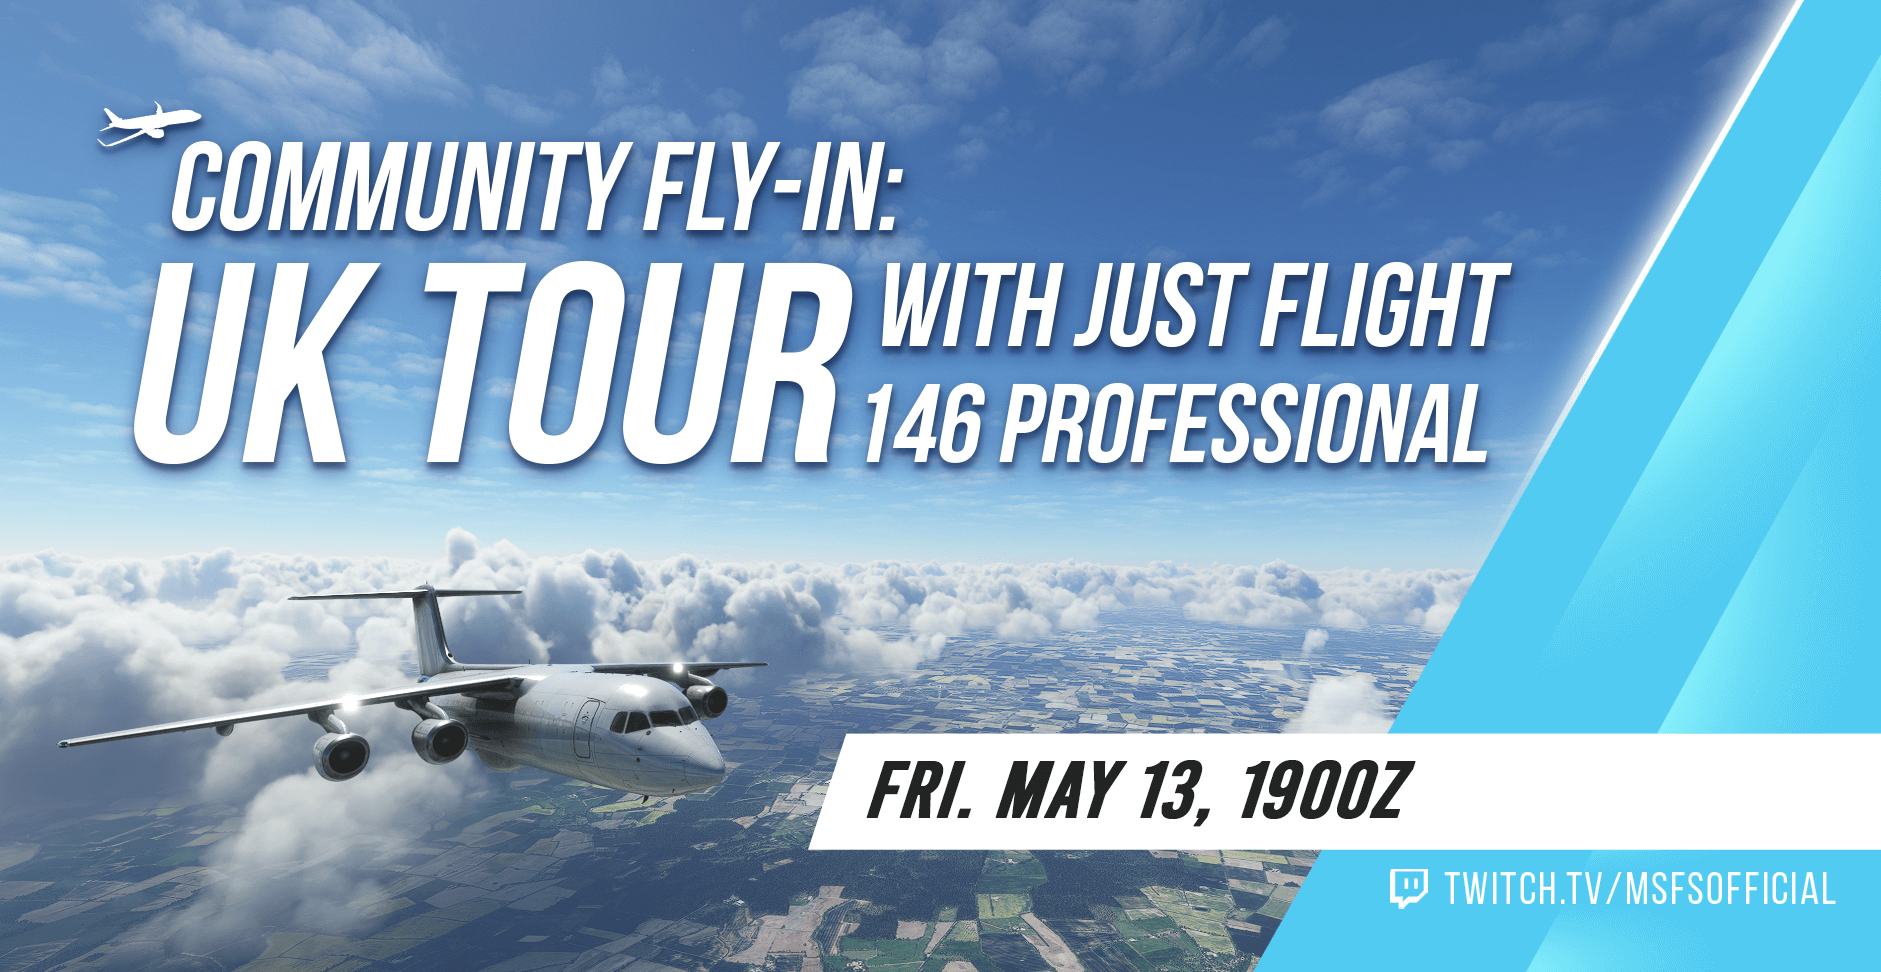 Community Fly in UK Tour with Just Flight - 146 professional on Friday, March 13 at 1900Z